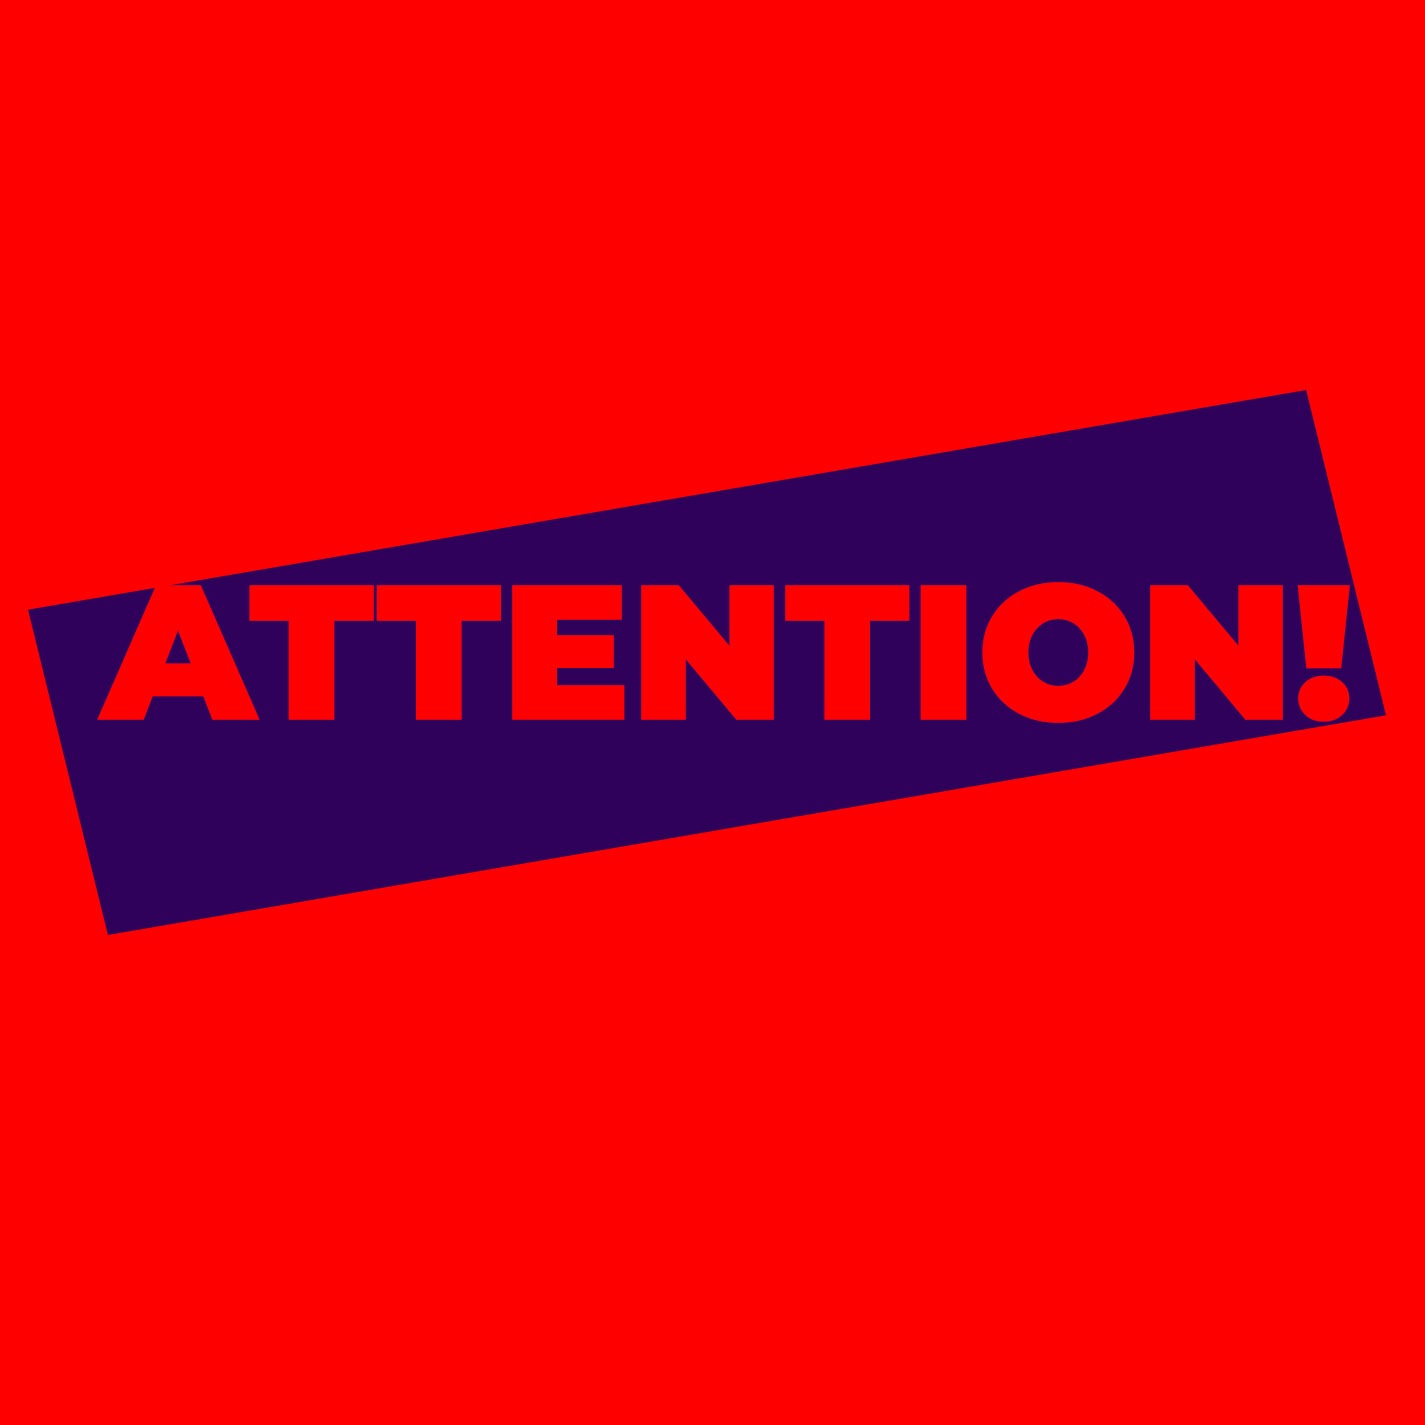 Attention Square